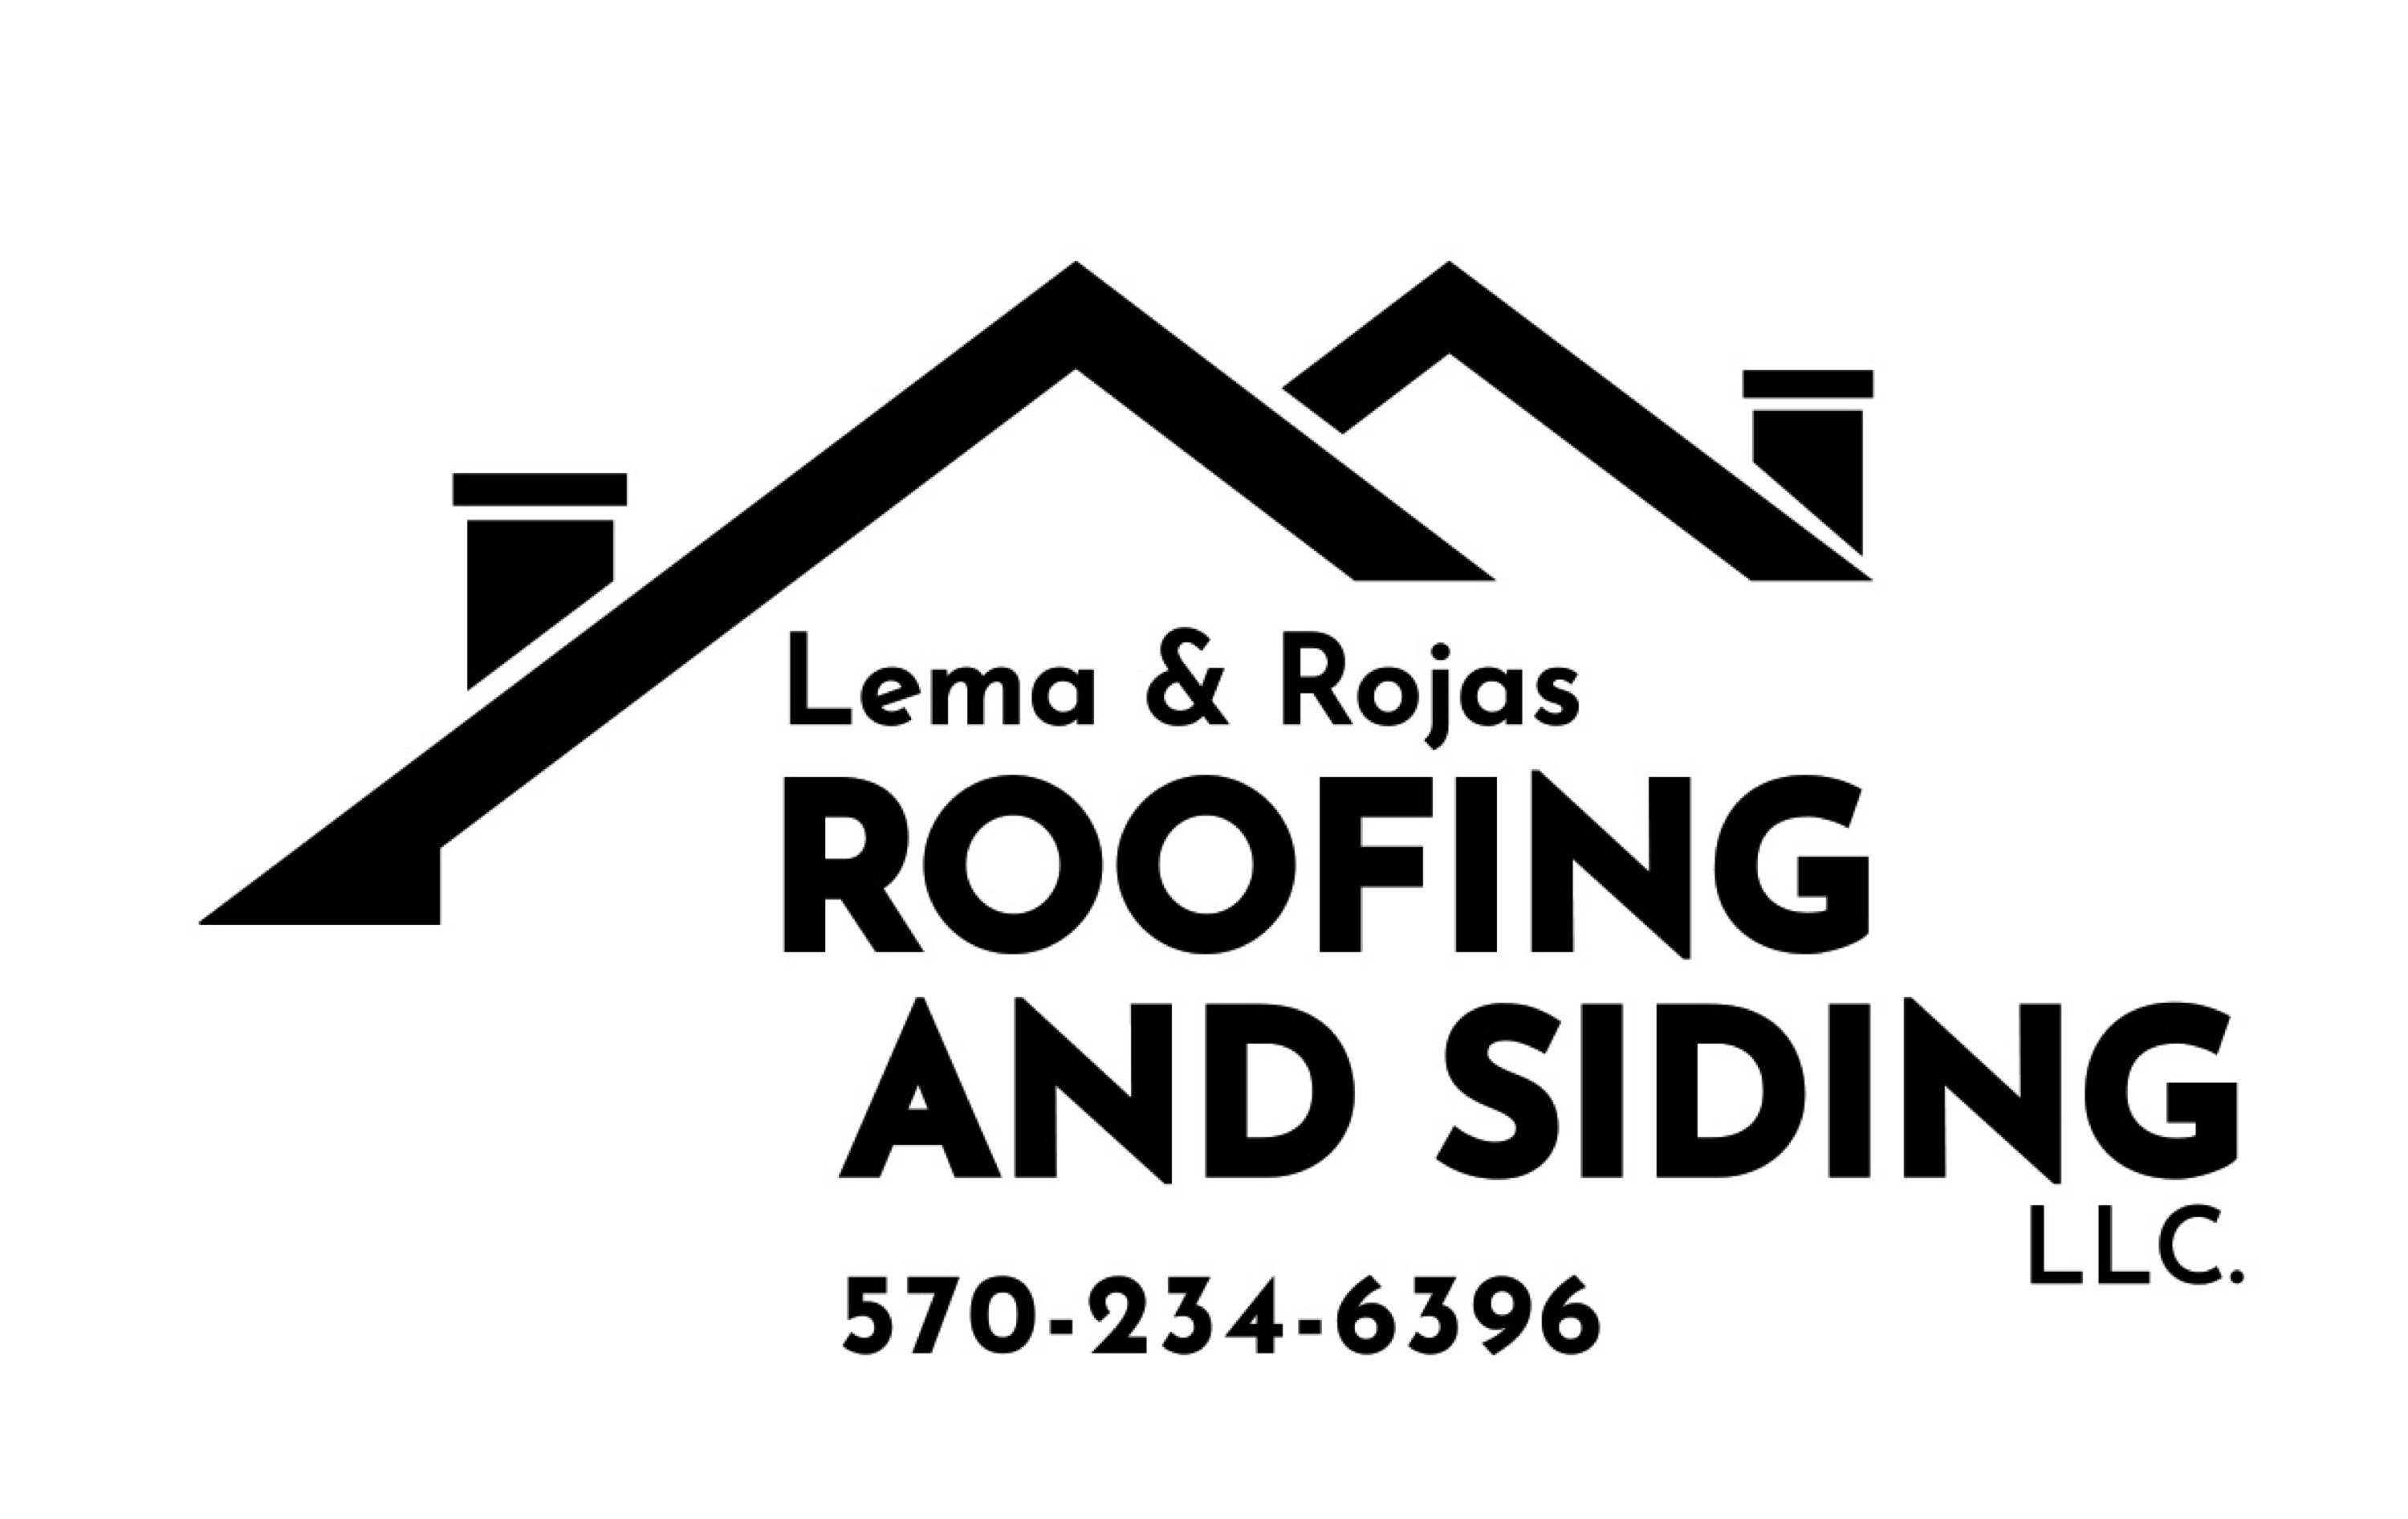 Lema & Rojas Roofing and Siding Logo